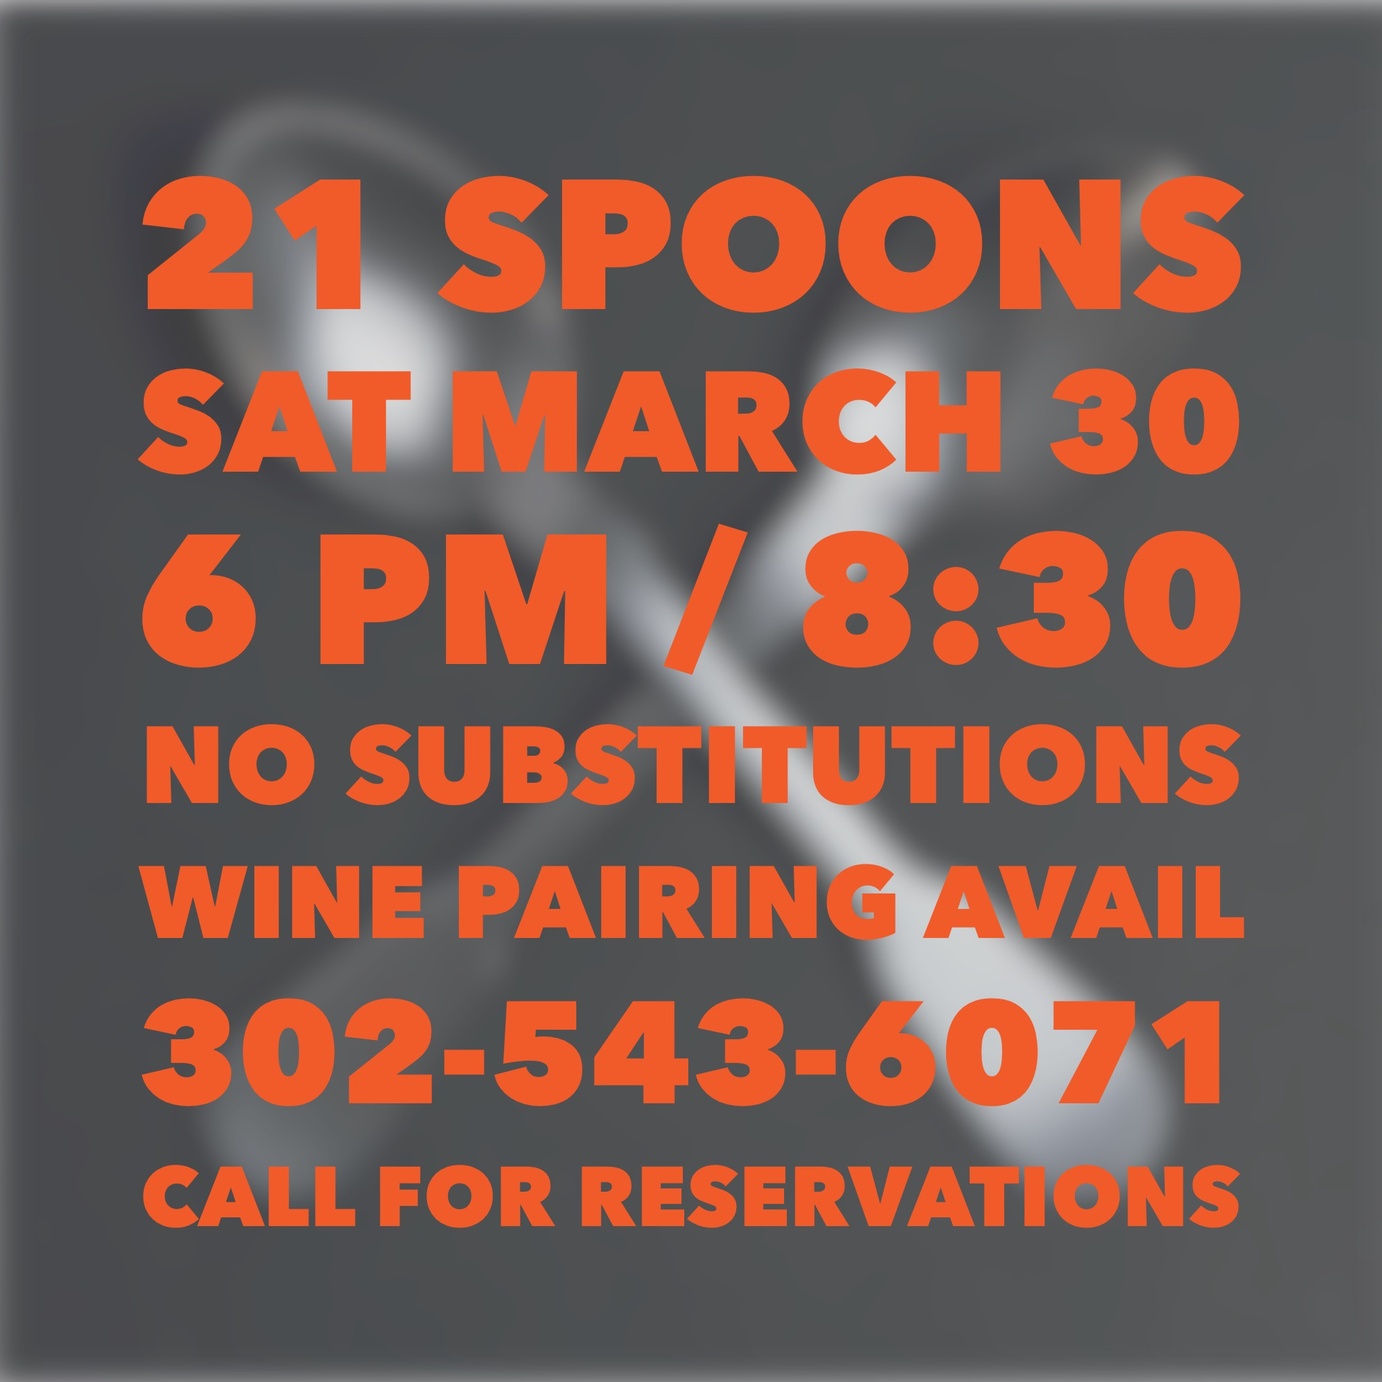 21 spoons upcoming event information